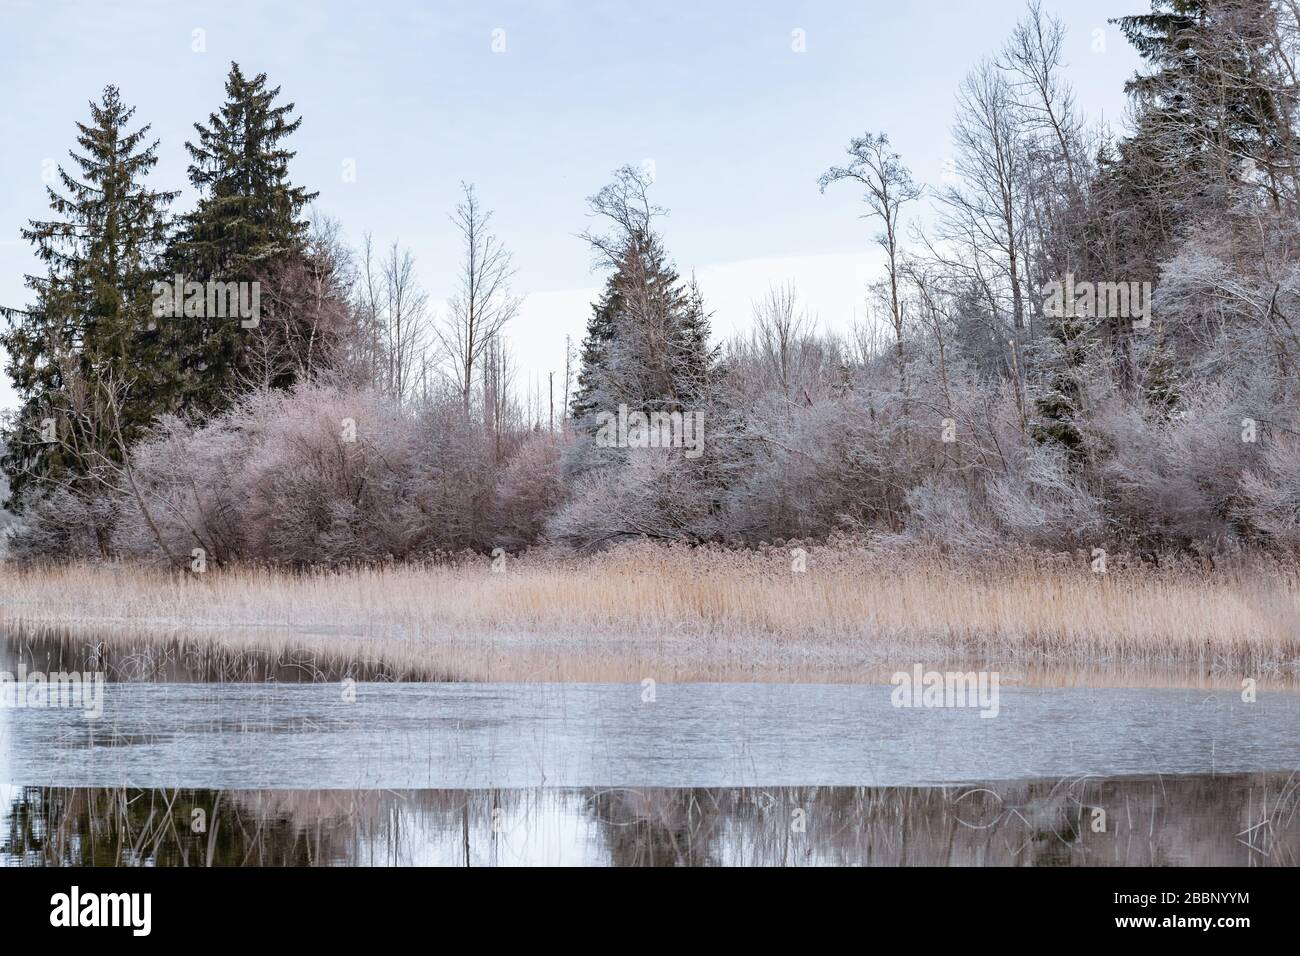 Landscape of a dry grass, a cane in the foreground, the forest on a background, grass is covered with hoarfrost, tranquillity Stock Photo